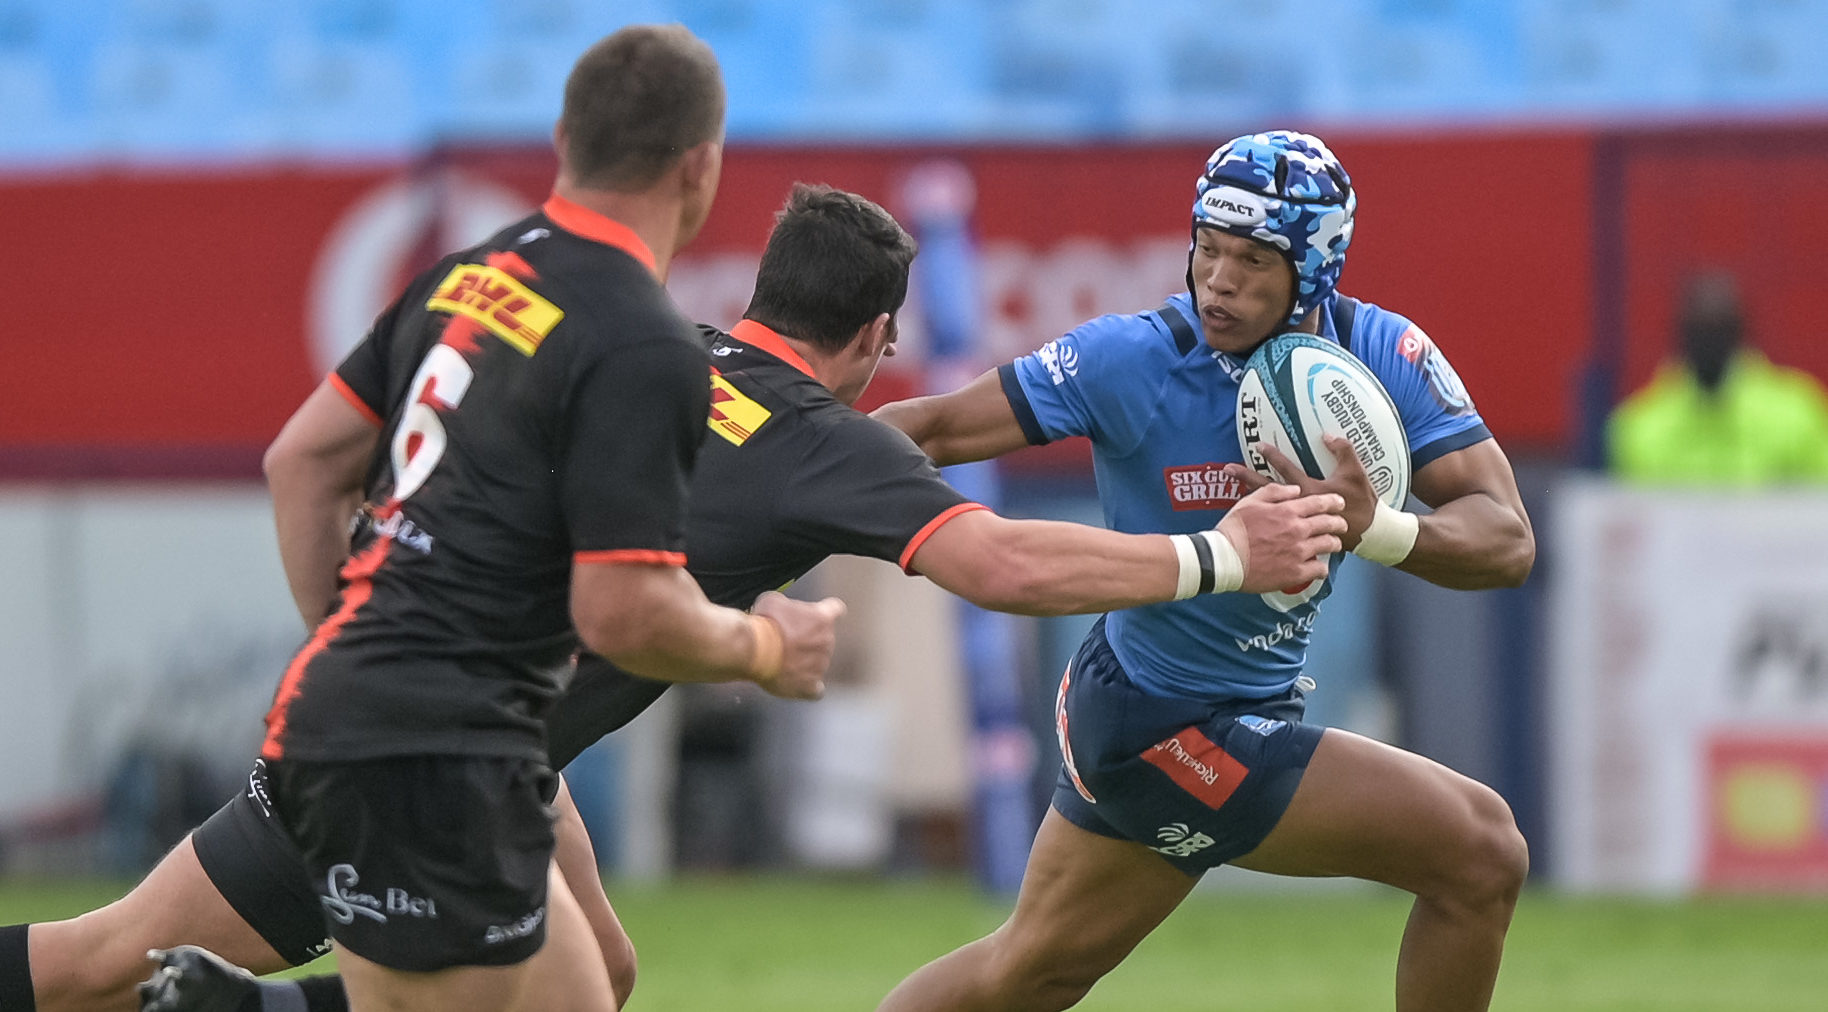 Kurt-Lee Arendse of the Vodacom Bulls during the United Rugby Championship 2021/22 game between the Vodacom Bulls and the DHL Stormers at Loftus Versfeld in Pretoria on 22 January 2022 ©Christiaan Kotze/BackpagePix